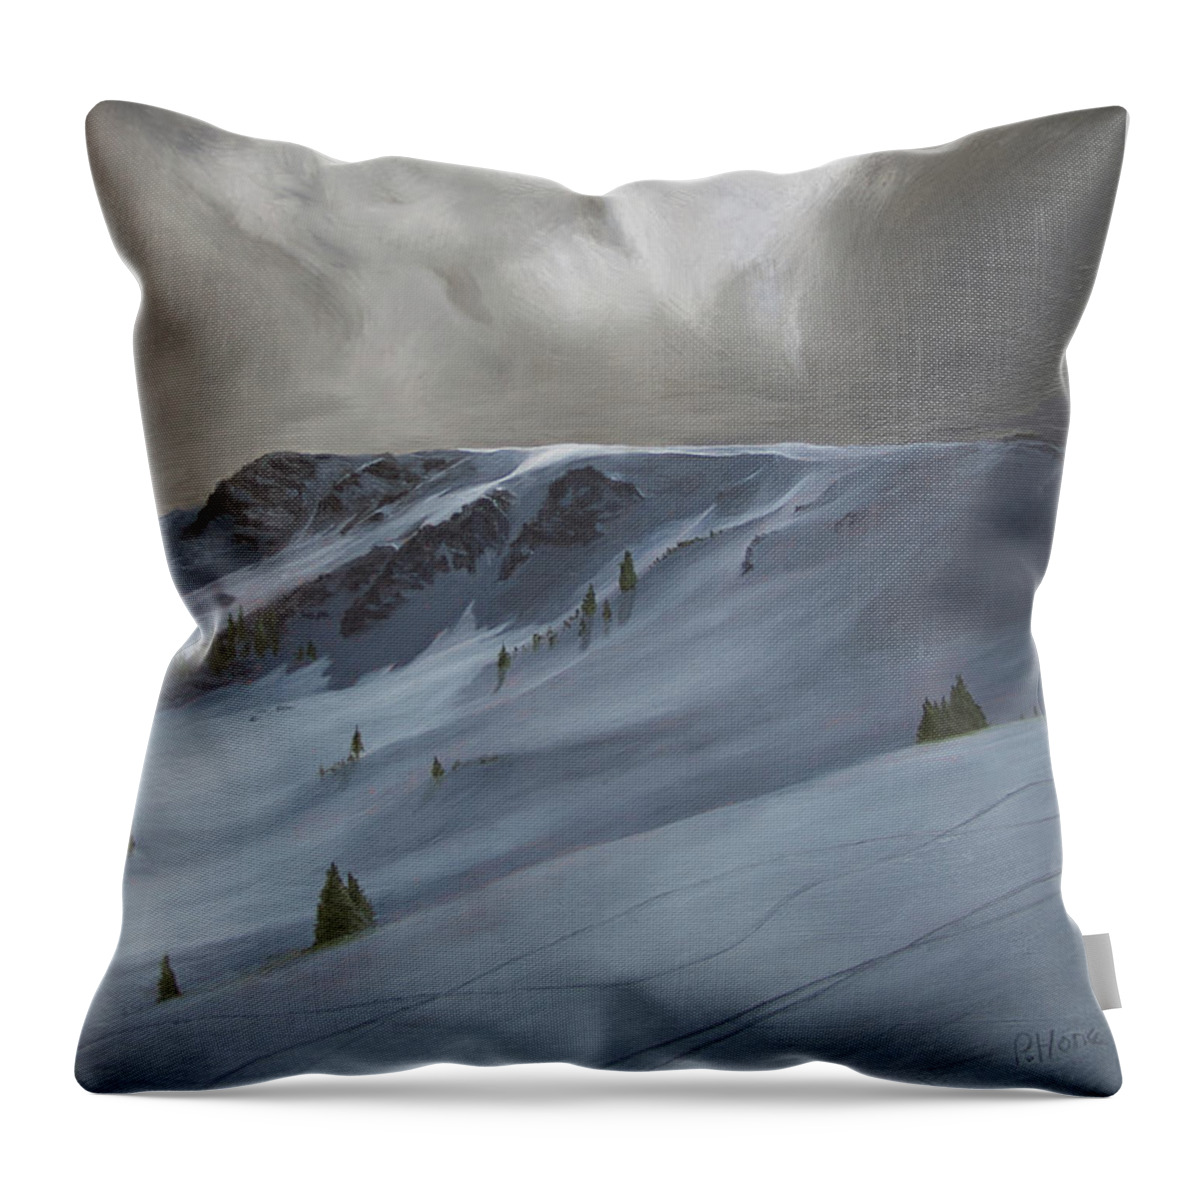 Hone Throw Pillow featuring the painting Cross-Country Skiing by Hone Williams